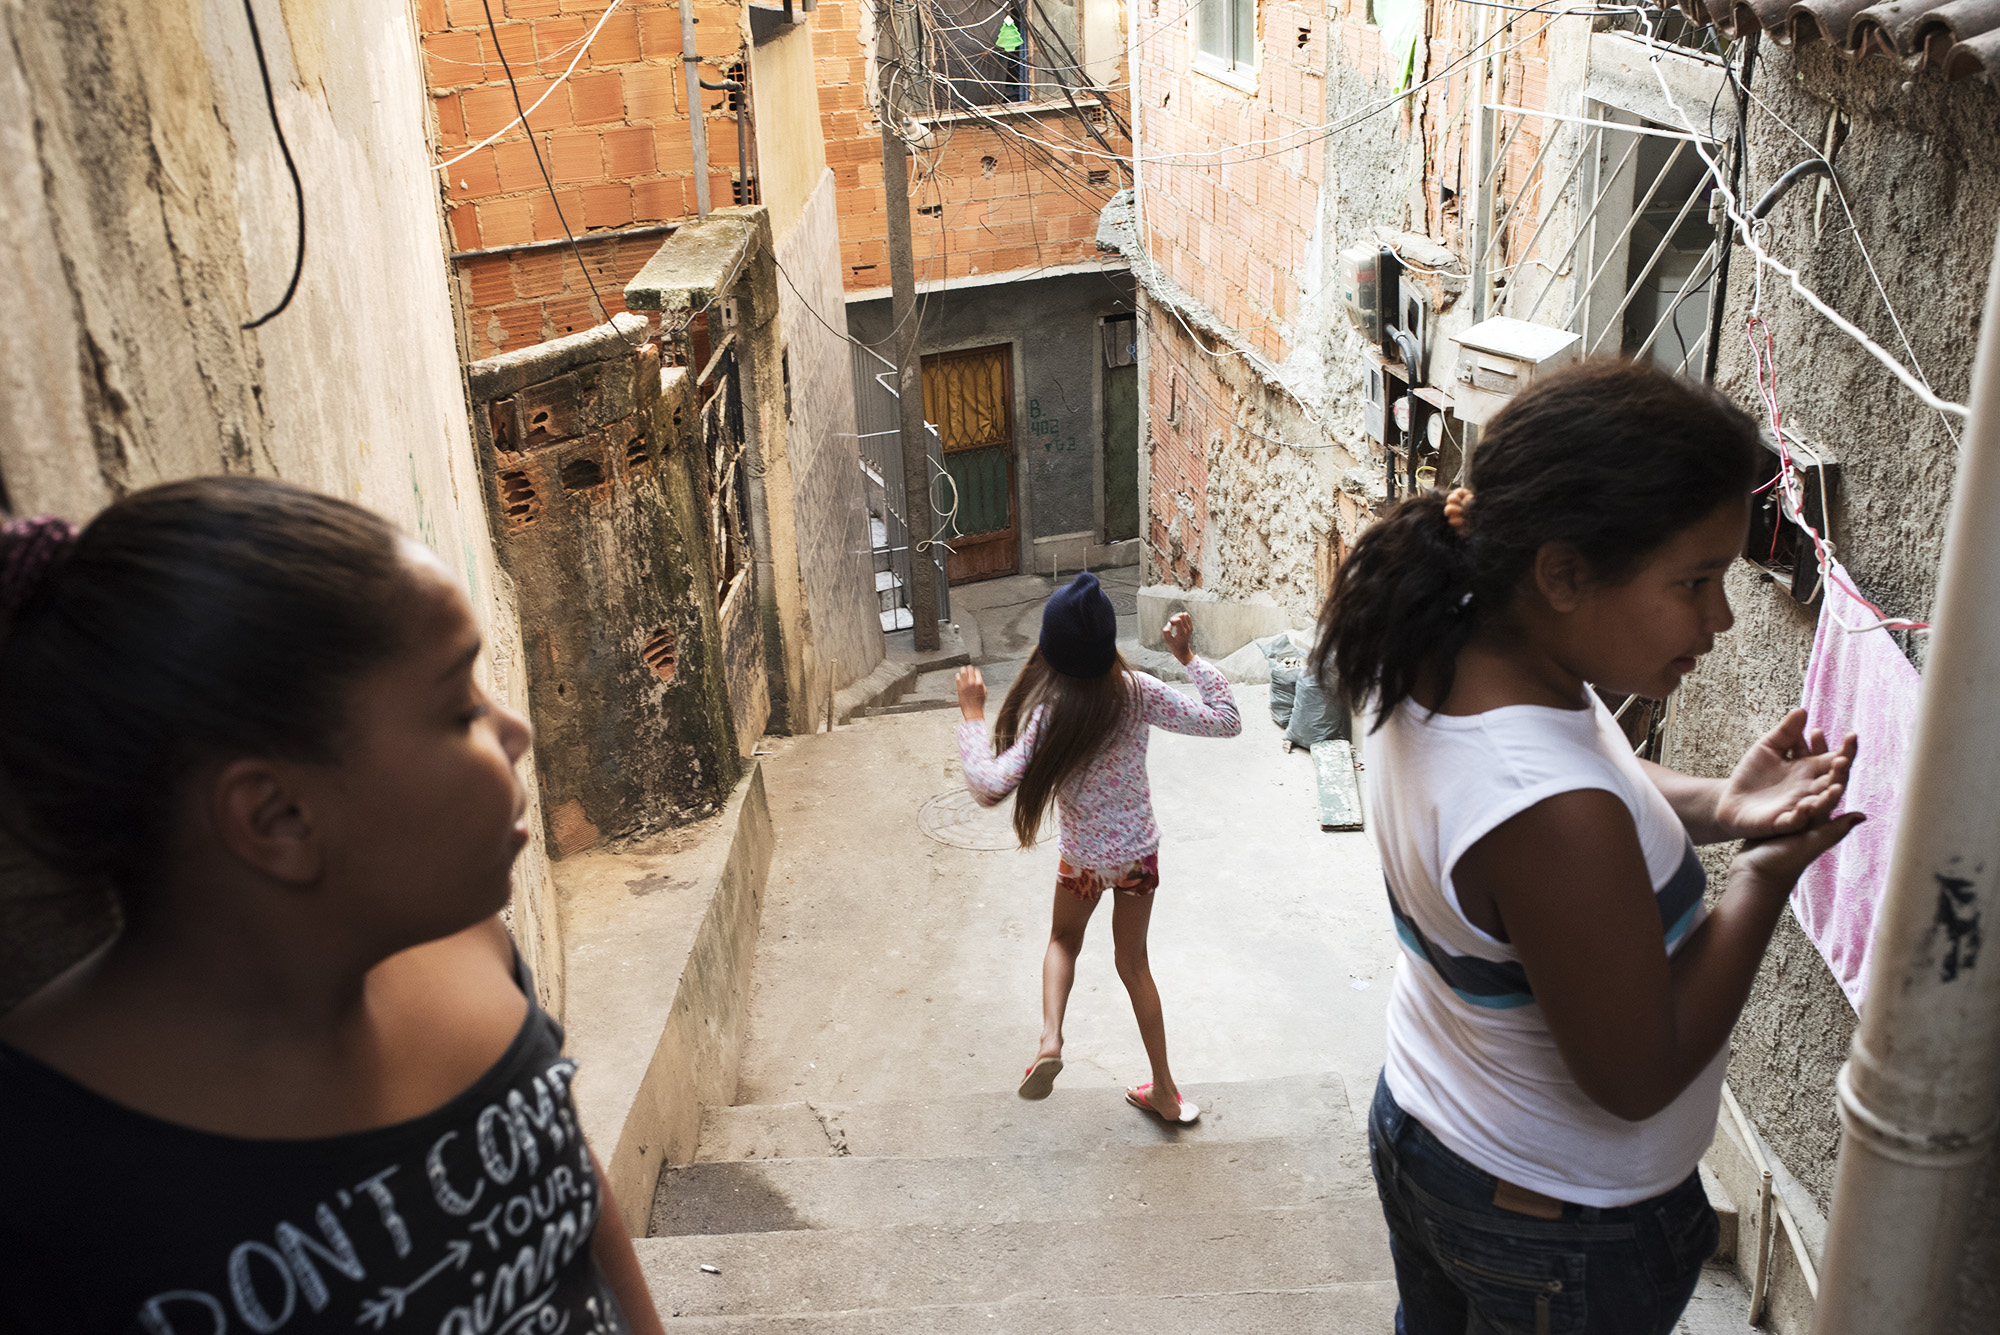  Inside the favela Vila Cruzeiro a bunch of girls are playing outside in the narrow alley in front of their houses.  